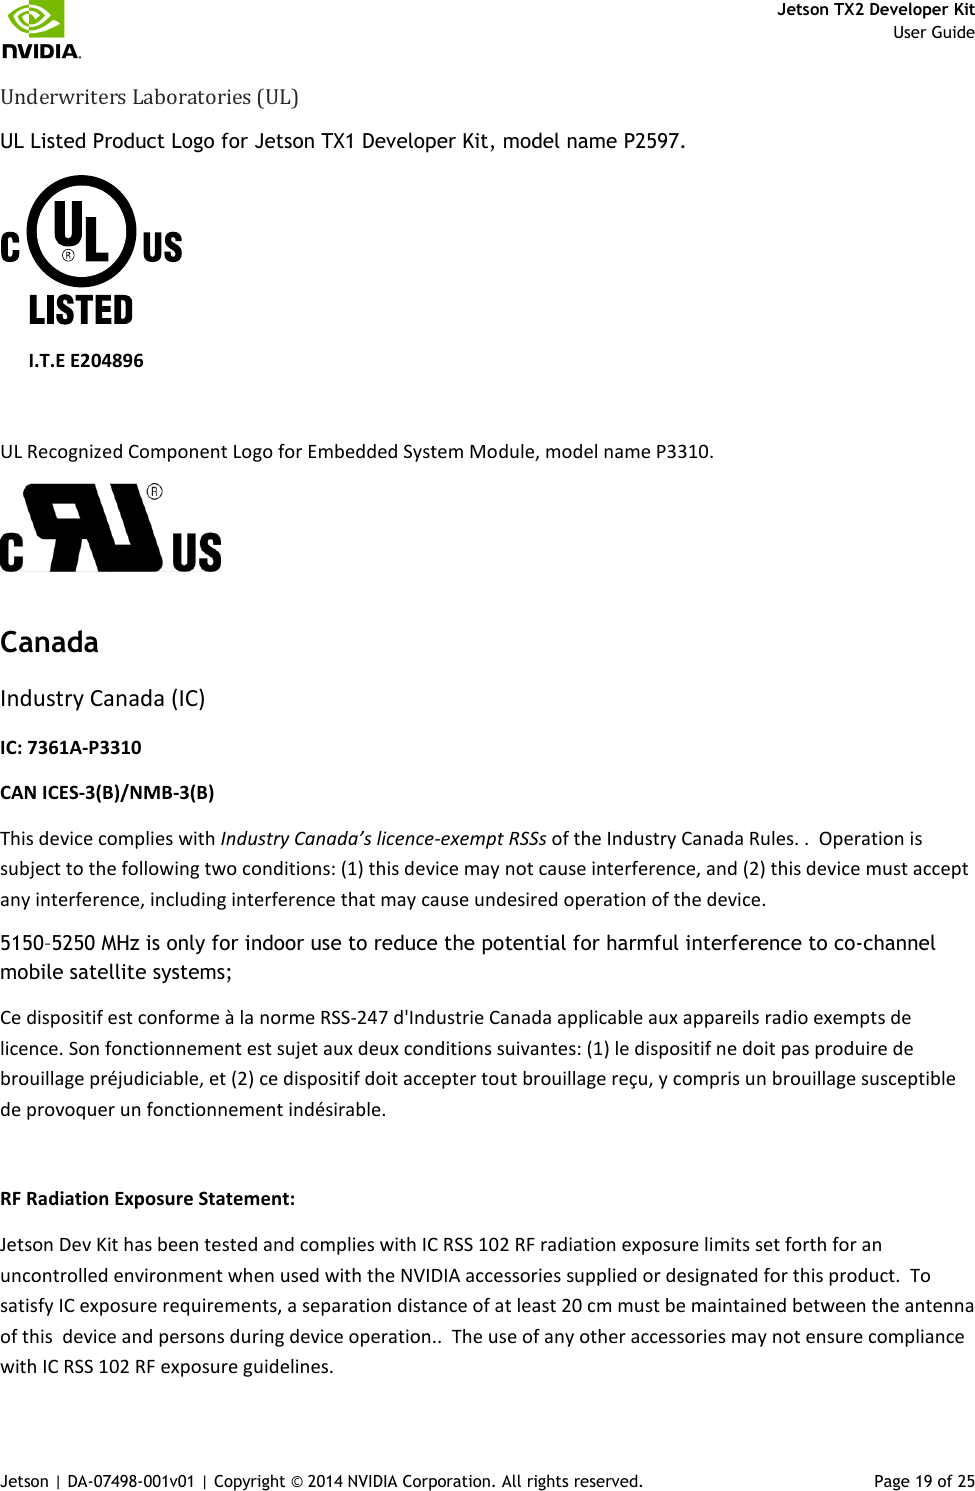     Jetson TX2 Developer Kit     User Guide Jetson | DA-07498-001v01 | Copyright © 2014 NVIDIA Corporation. All rights reserved.  Page 19 of 25 Underwriters Laboratories (UL) UL Listed Product Logo for Jetson TX1 Developer Kit, model name P2597.                       I.T.E E204896  UL Recognized Component Logo for Embedded System Module, model name P3310.  Canada Industry Canada (IC) IC: 7361A-P3310 CAN ICES-3(B)/NMB-3(B) This device complies with Industry Canada’s licence-exempt RSSs of the Industry Canada Rules. .  Operation is subject to the following two conditions: (1) this device may not cause interference, and (2) this device must accept any interference, including interference that may cause undesired operation of the device. 5150–5250 MHz is only for indoor use to reduce the potential for harmful interference to co-channel mobile satellite systems; Ce dispositif est conforme à la norme RSS-247 d&apos;Industrie Canada applicable aux appareils radio exempts de licence. Son fonctionnement est sujet aux deux conditions suivantes: (1) le dispositif ne doit pas produire de brouillage préjudiciable, et (2) ce dispositif doit accepter tout brouillage reçu, y compris un brouillage susceptible de provoquer un fonctionnement indésirable.  RF Radiation Exposure Statement:  Jetson Dev Kit has been tested and complies with IC RSS 102 RF radiation exposure limits set forth for an uncontrolled environment when used with the NVIDIA accessories supplied or designated for this product.  To satisfy IC exposure requirements, a separation distance of at least 20 cm must be maintained between the antenna of this  device and persons during device operation..  The use of any other accessories may not ensure compliance with IC RSS 102 RF exposure guidelines. 